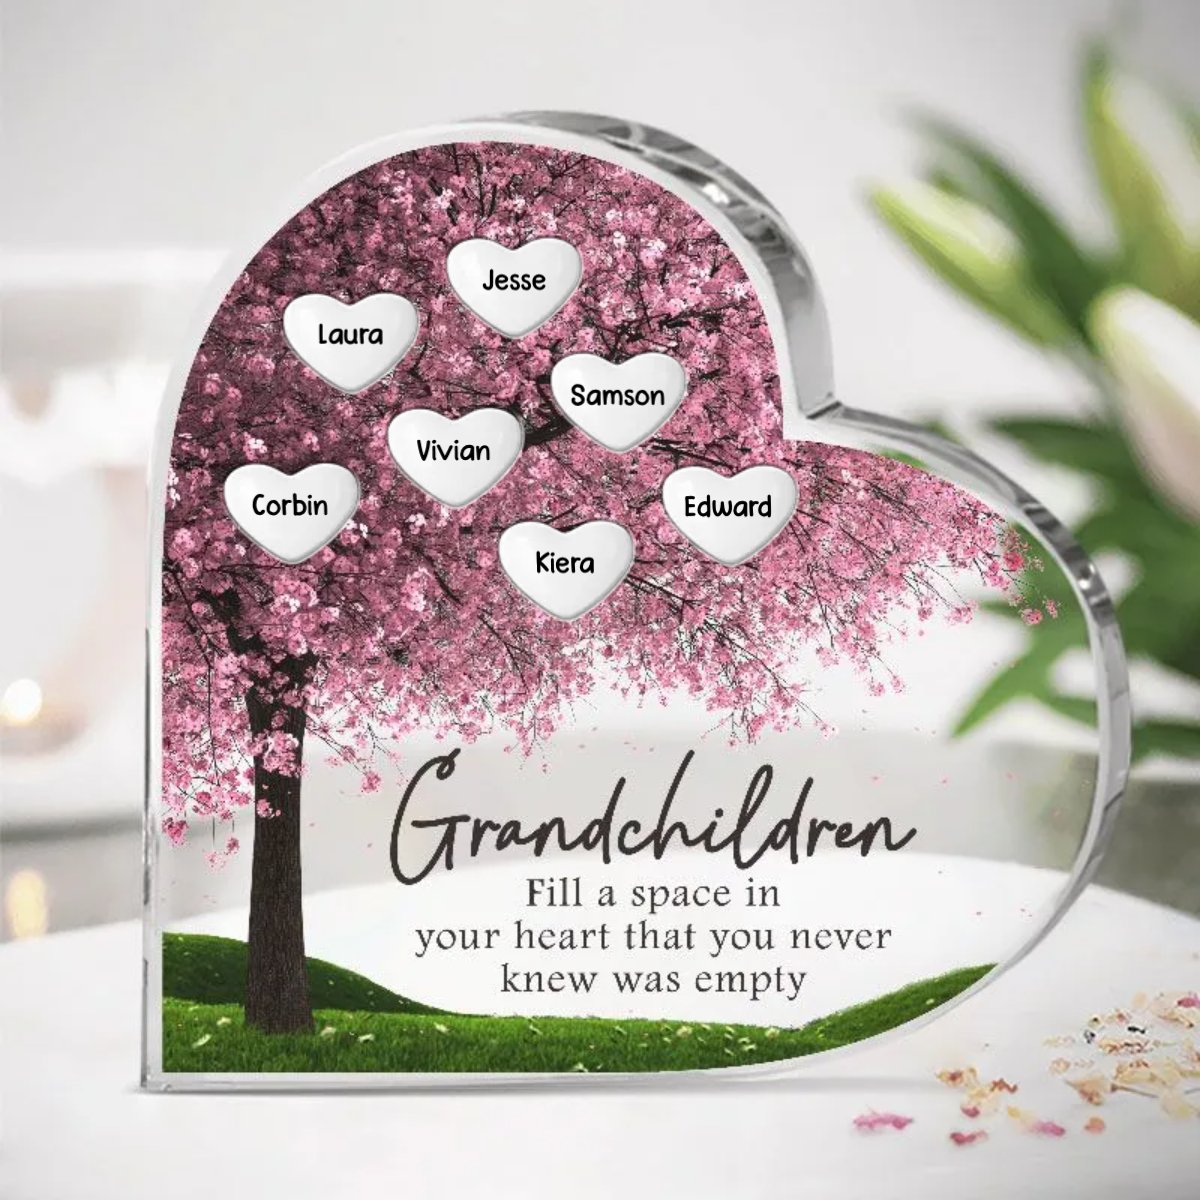 Grandma - Grandchildren Fill In A Space In Your Heart - Personalized Heart Acrylic Plaque - The Next Custom Gift